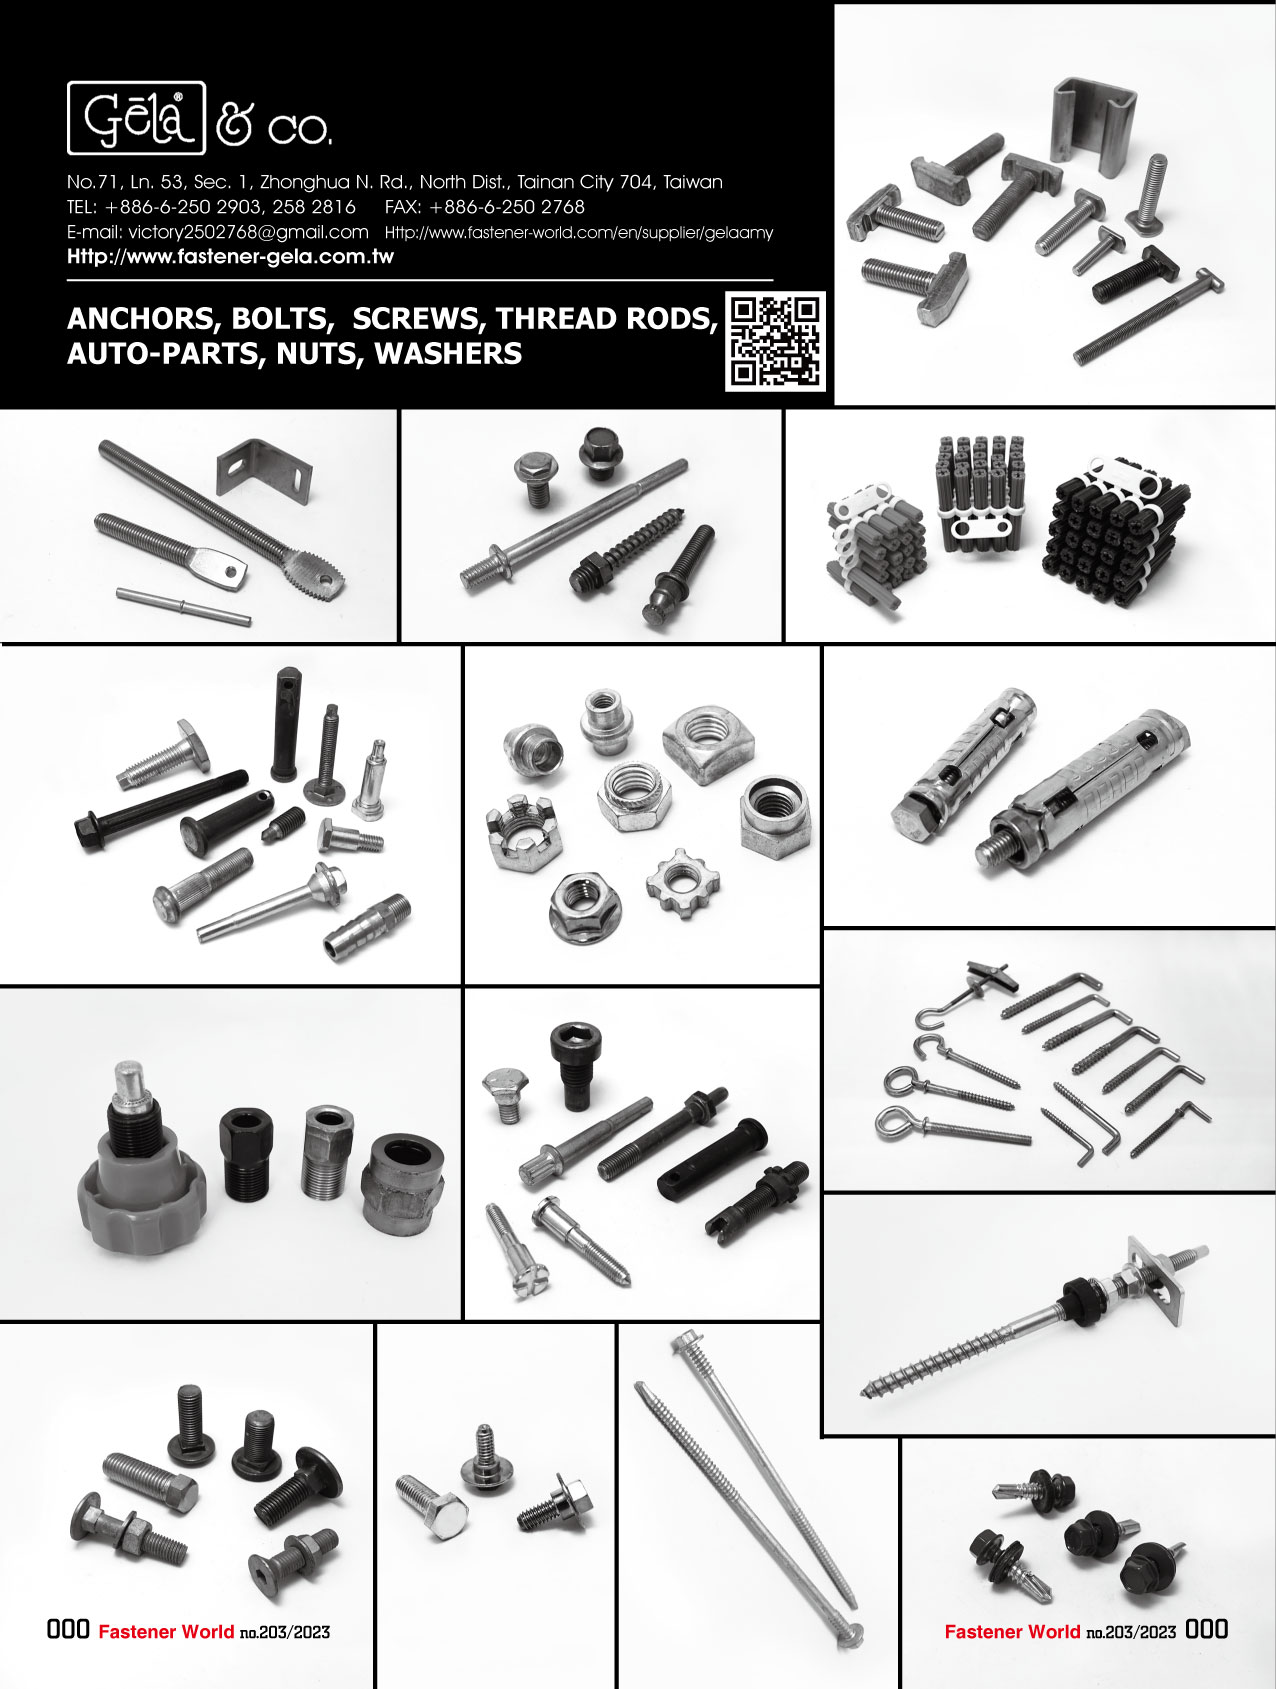 GELA & COMPANY  , Anchors, Bolts, Screws, Thread Rods, Auto-Parts, Nuts, Washers , Automotive Parts